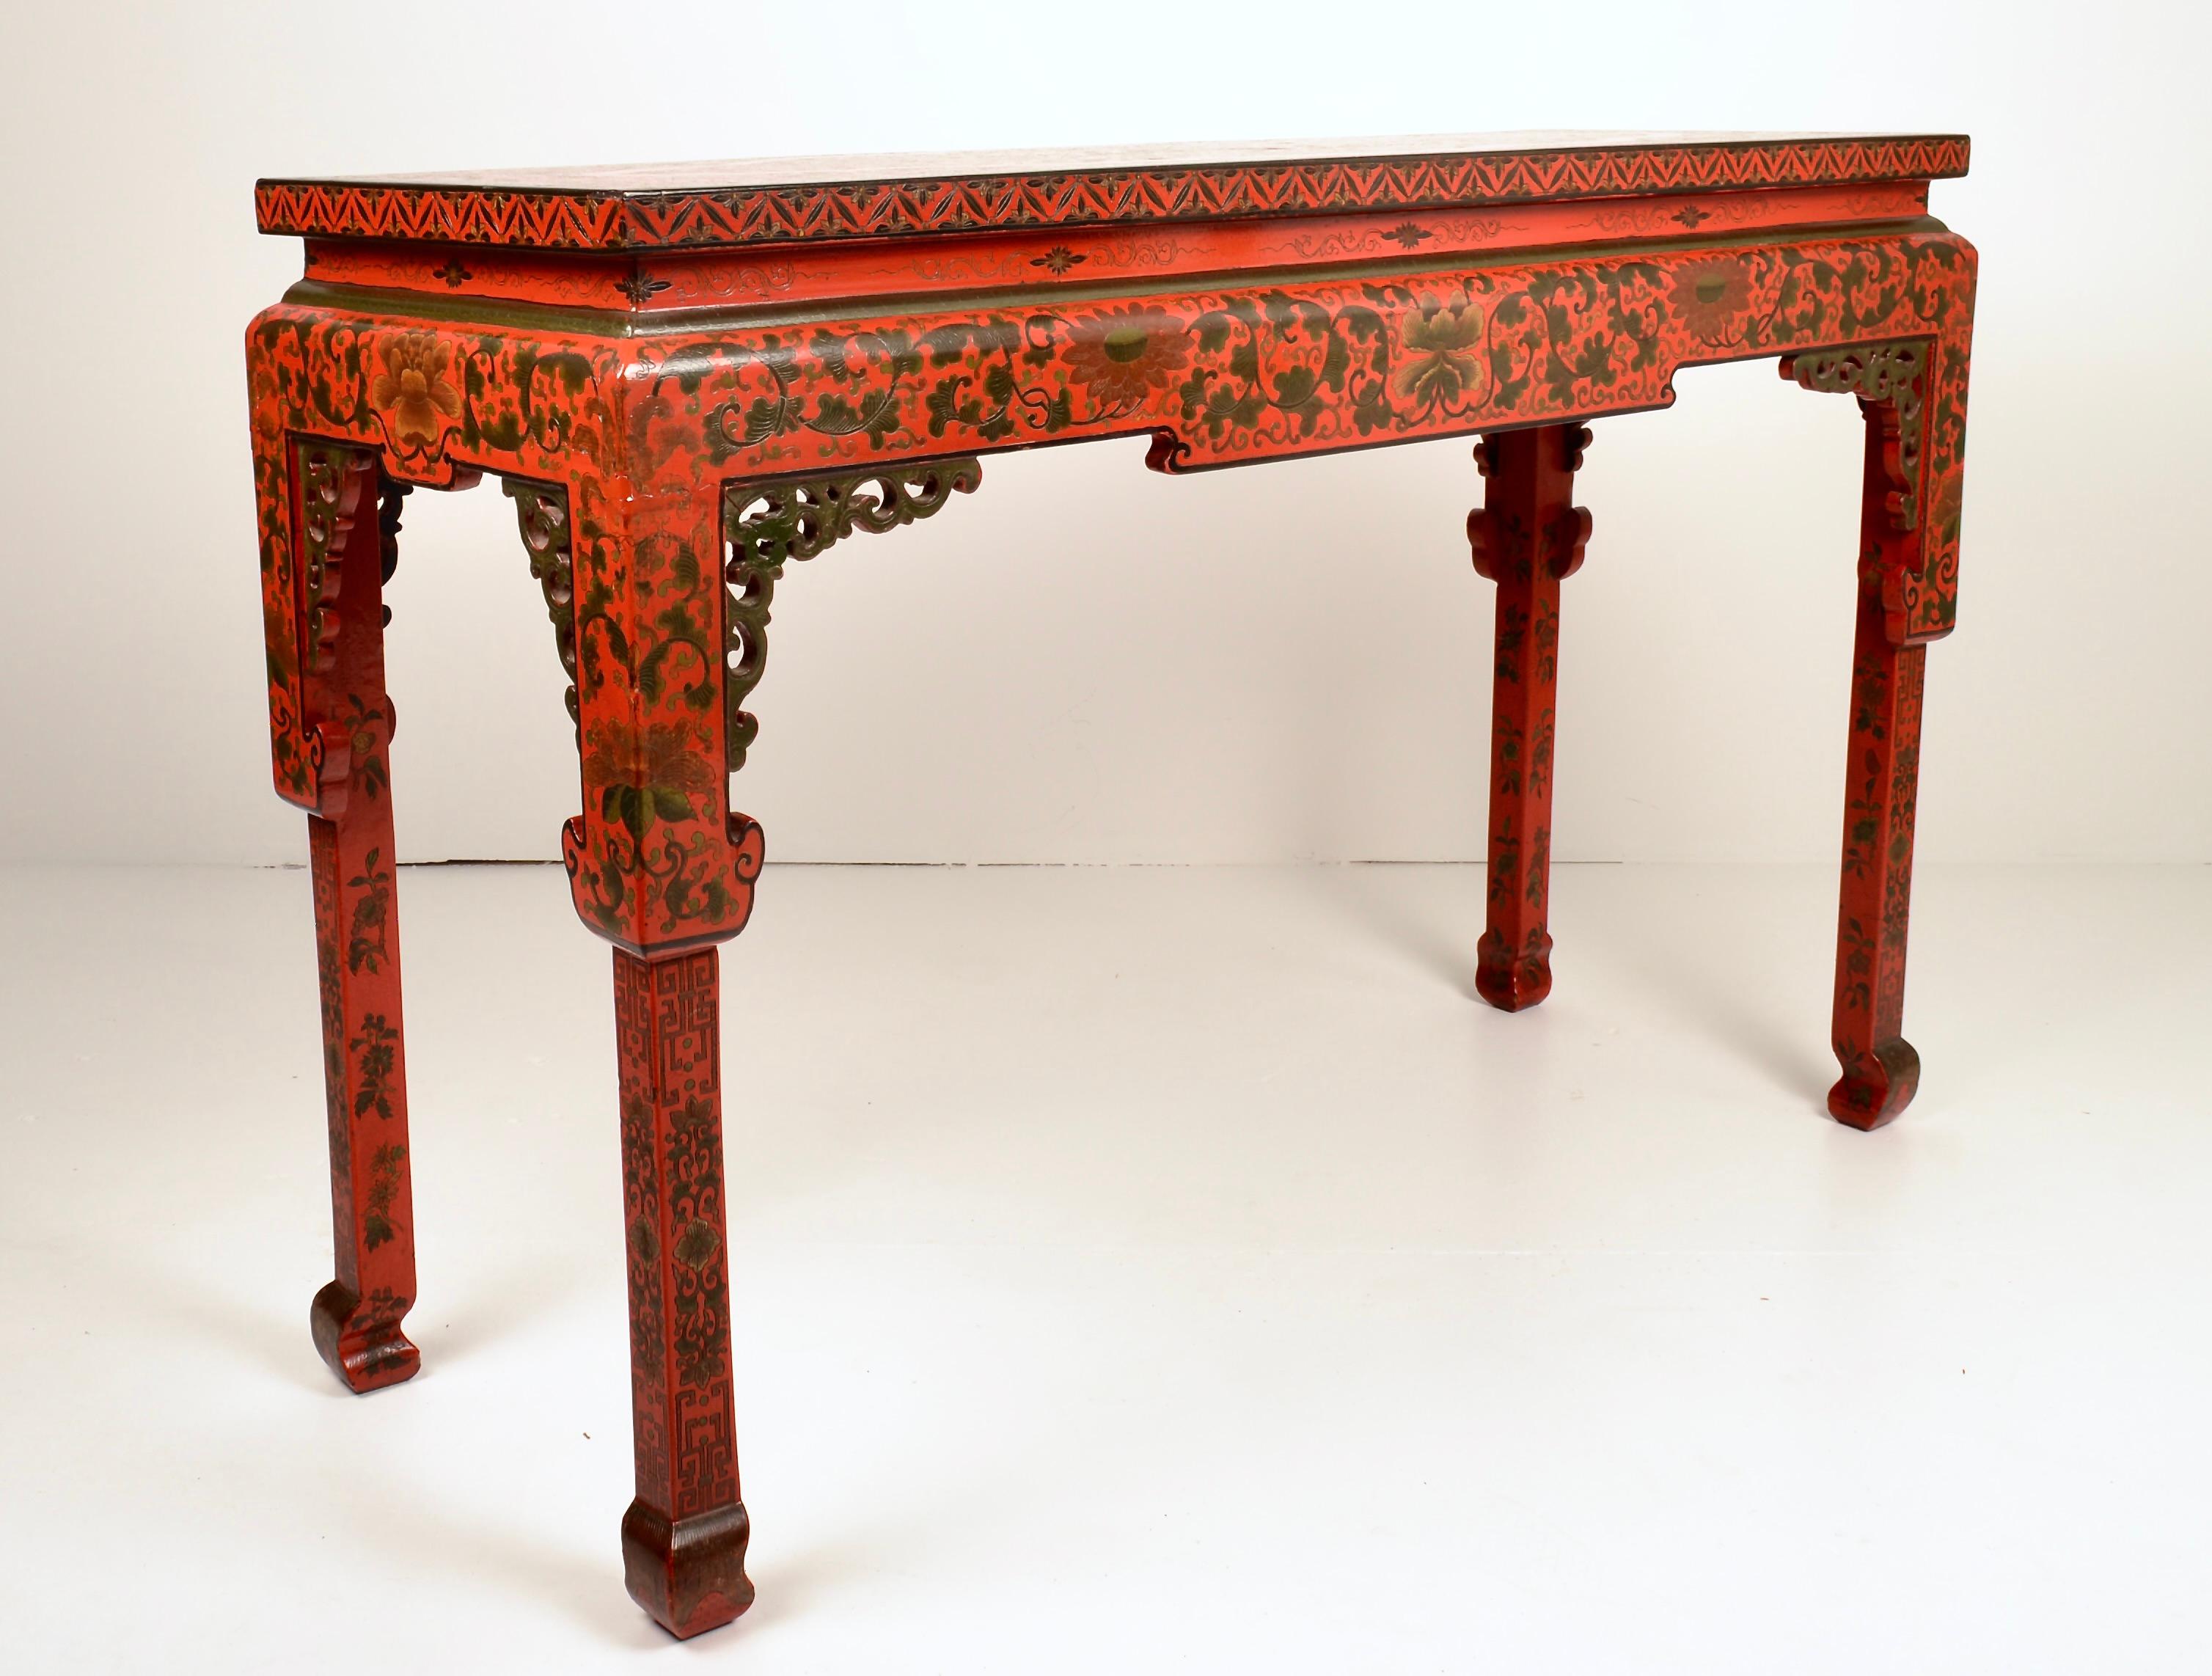 Wonderful attention to detail makes this console outstanding, from finely hand painted decoration, carved fretwork, incised greek key border to classic Chinese Chippendale form.  And that vibrant red color!  Very fine, almost perfect condition.